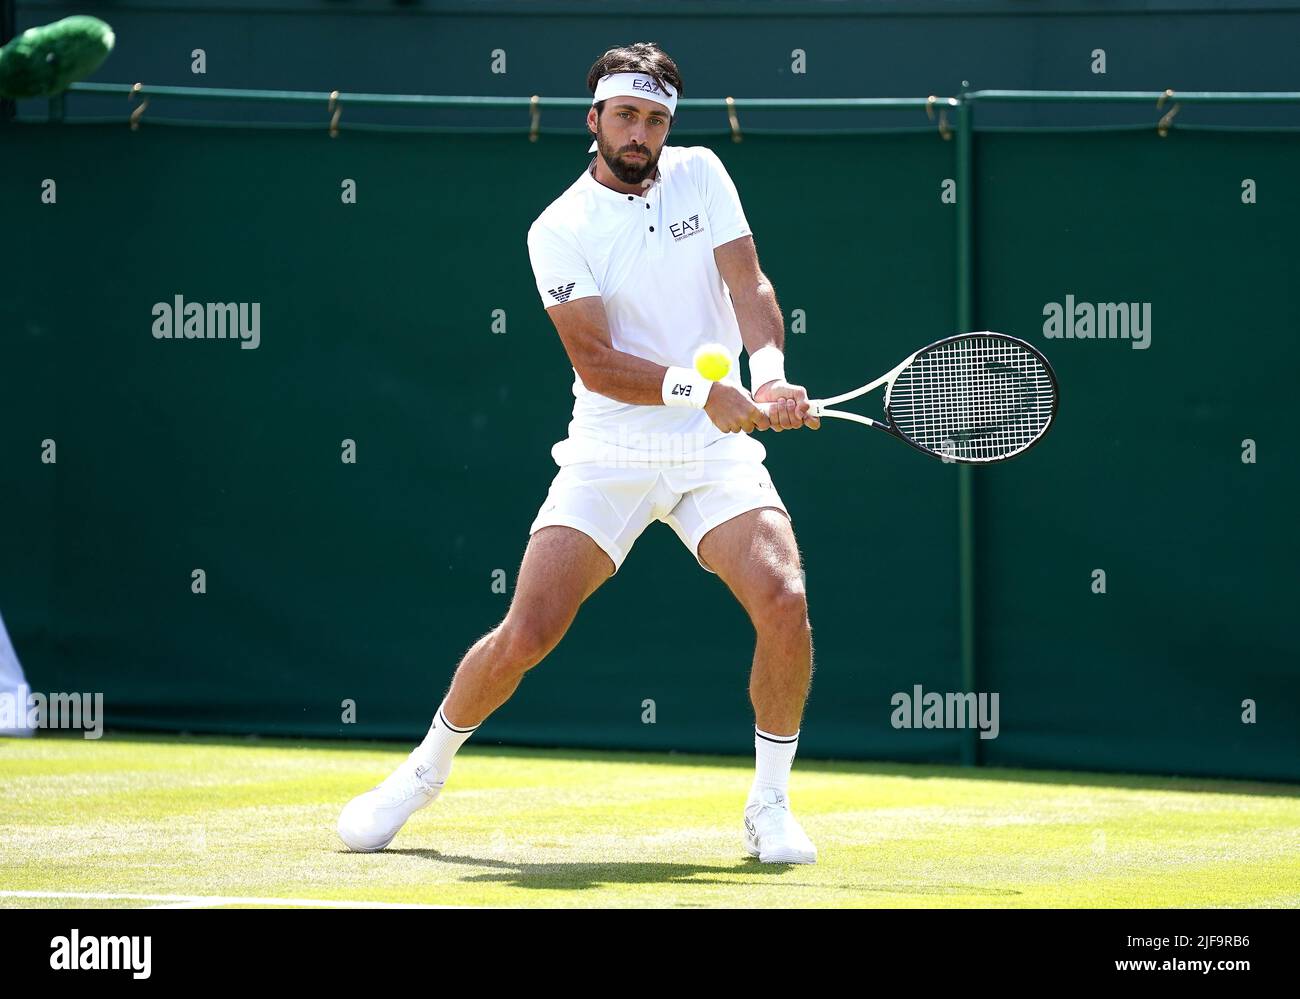 Nikoloz Basilashvili in action against Netherland's Tim van Rijthoven in the third round on court 12 during day five of the 2022 Wimbledon Championships at the All England Lawn Tennis and Croquet Club, Wimbledon. Picture date: Friday July 1, 2022. Stock Photo